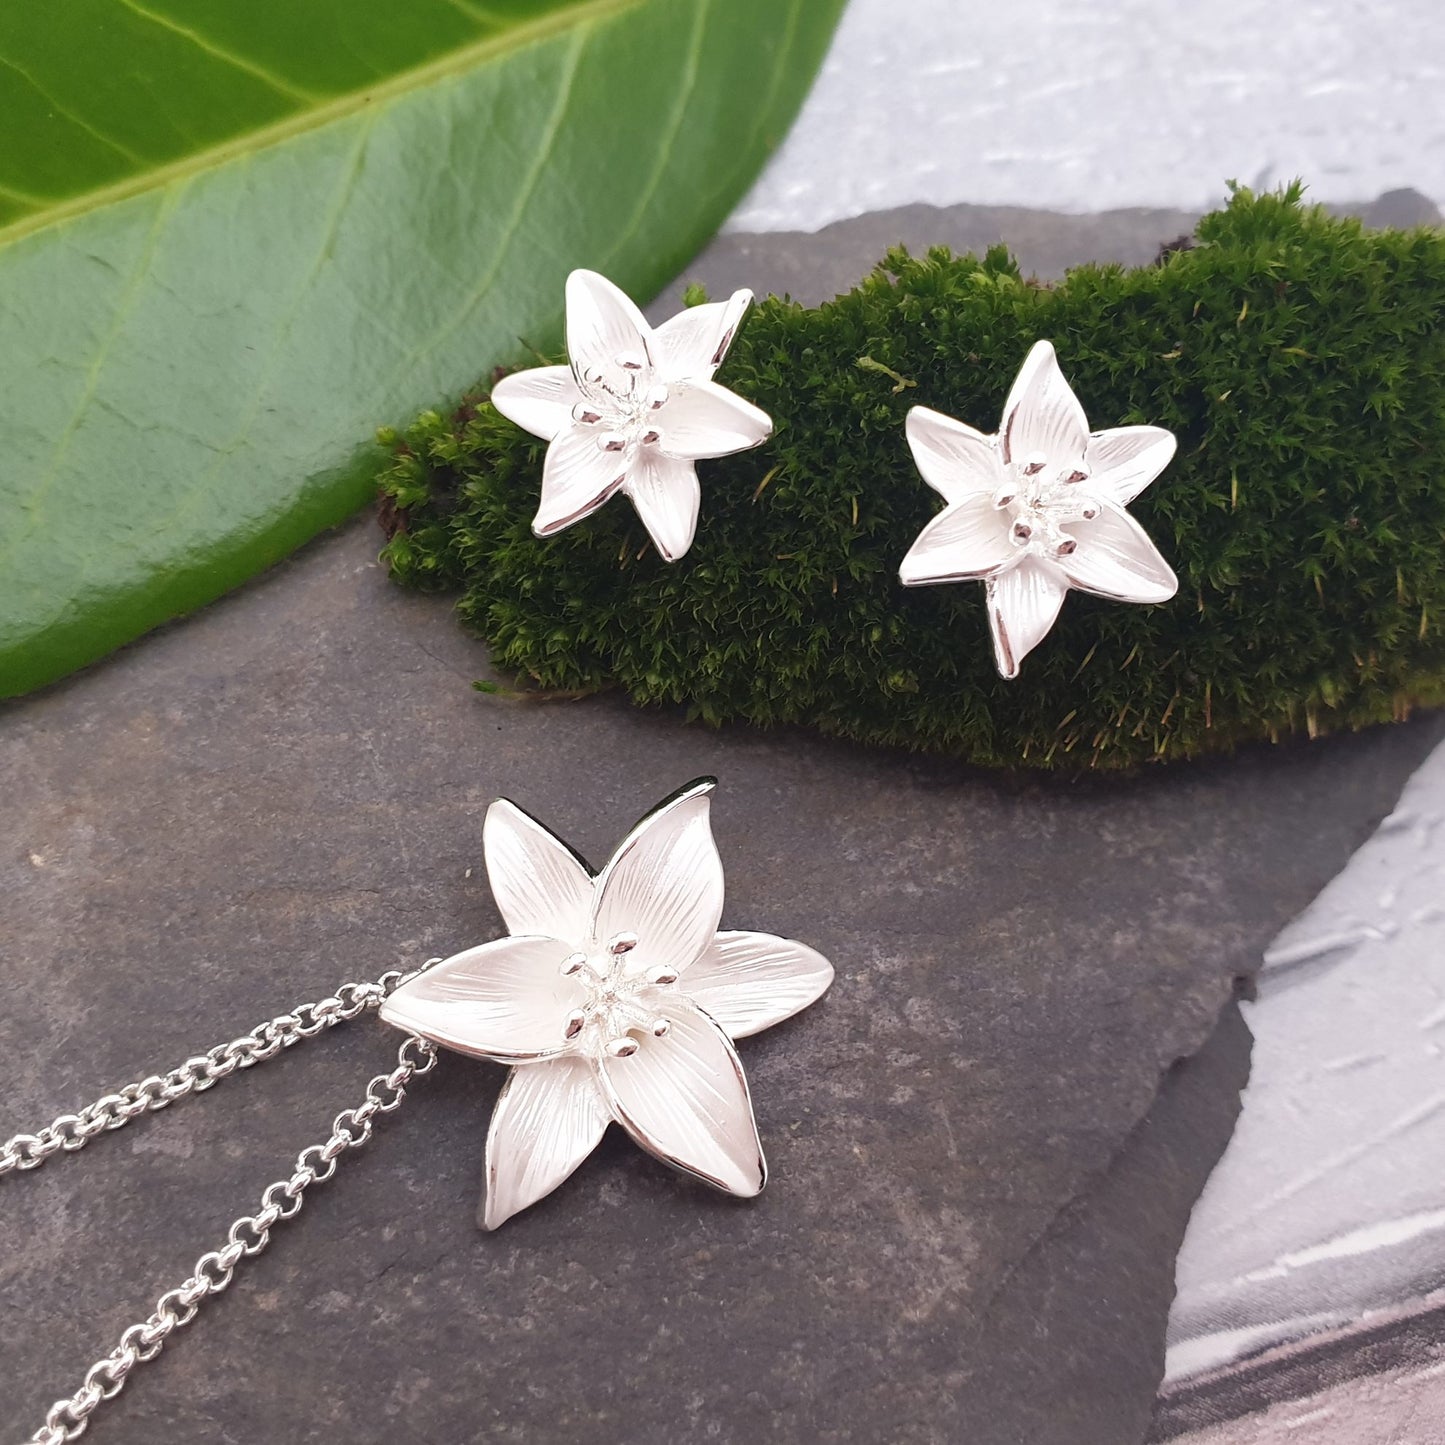 2 piece necklace and earring set showing the white Madonna lily